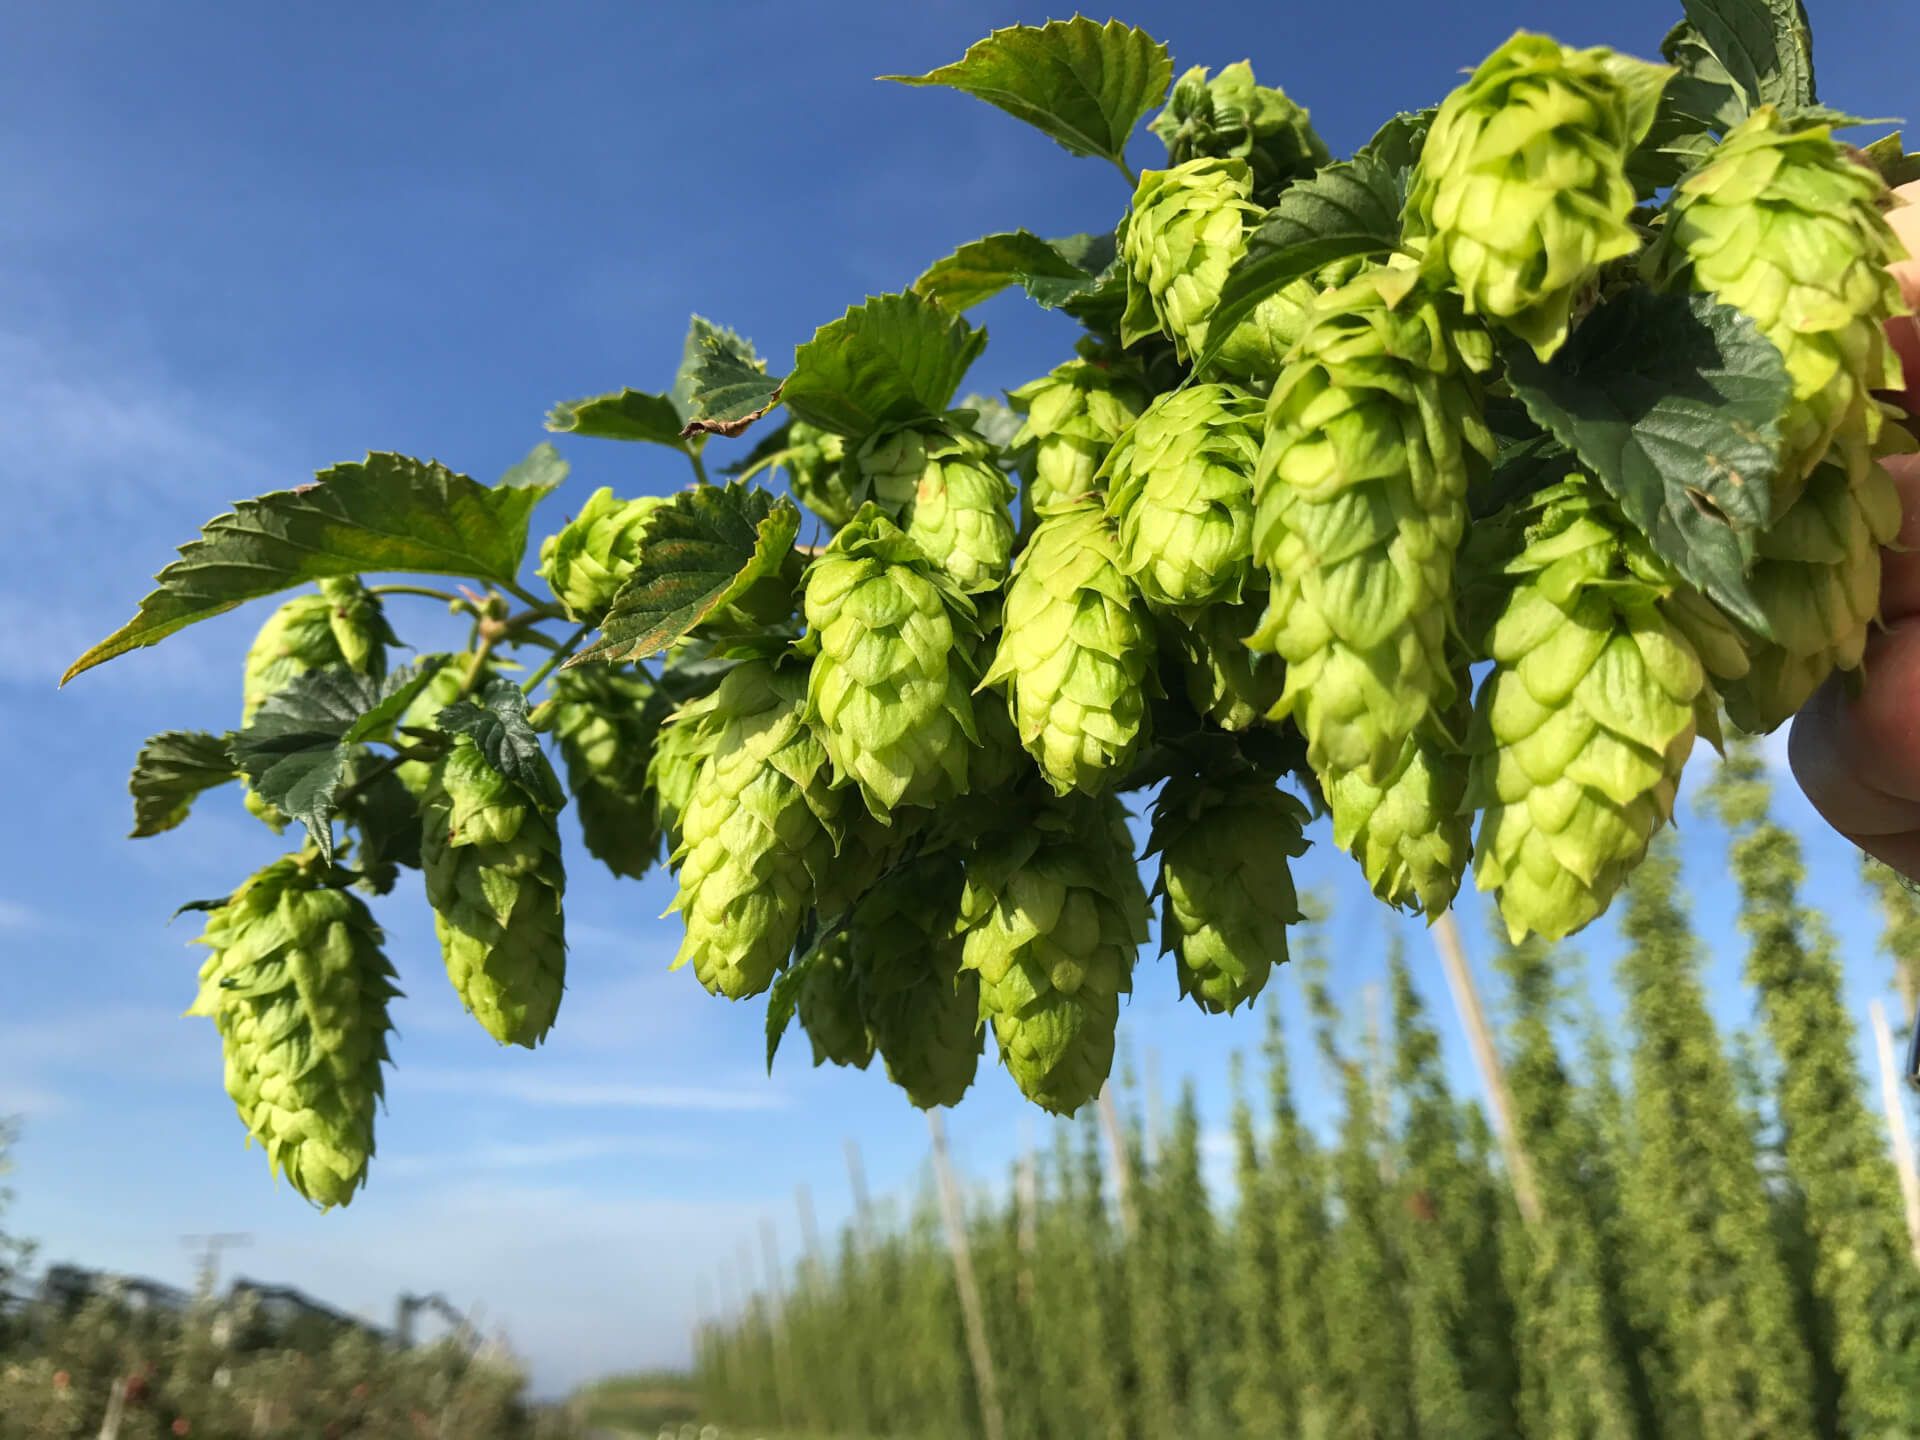 Experience hops